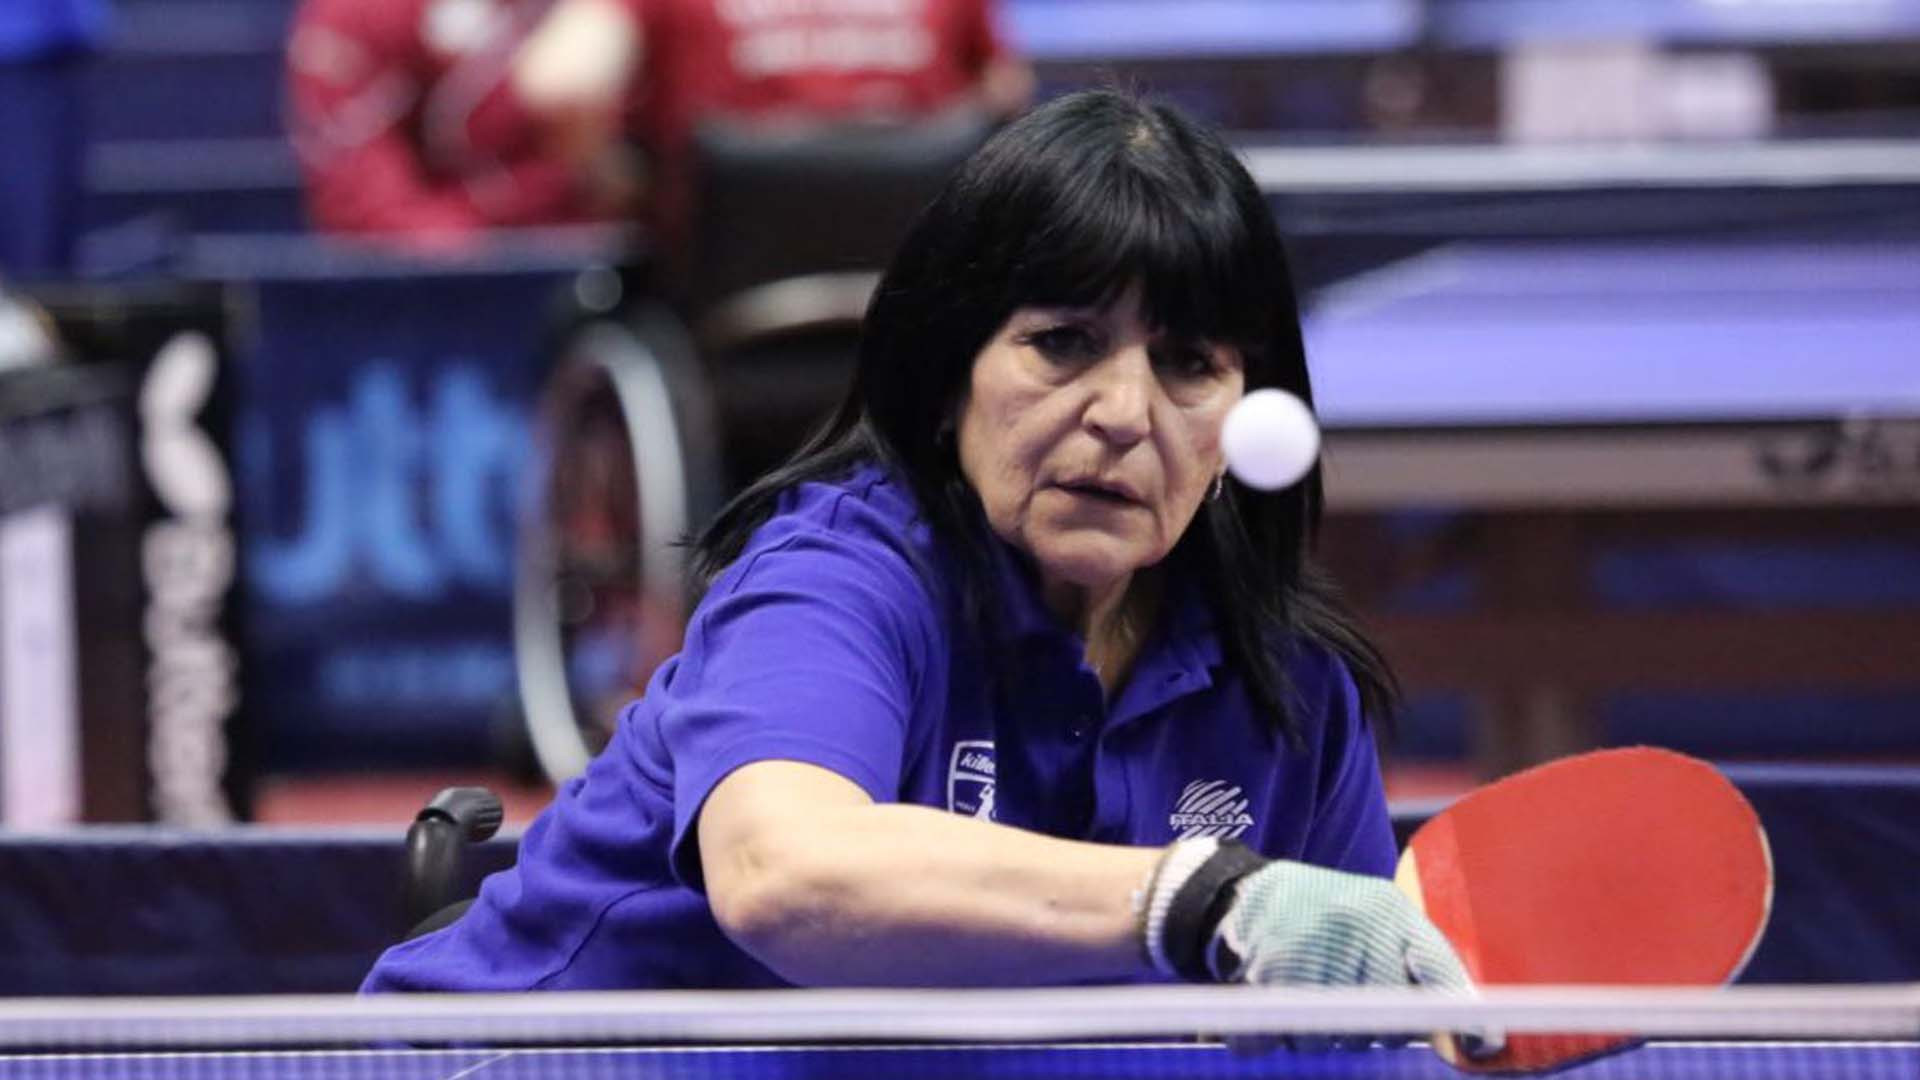 The Italian Table Tennis Federation has issued an open invitation to international umpires wanting to officiate at the 2018 Lignano Para Open ©ITTF/Domenico Vallorini